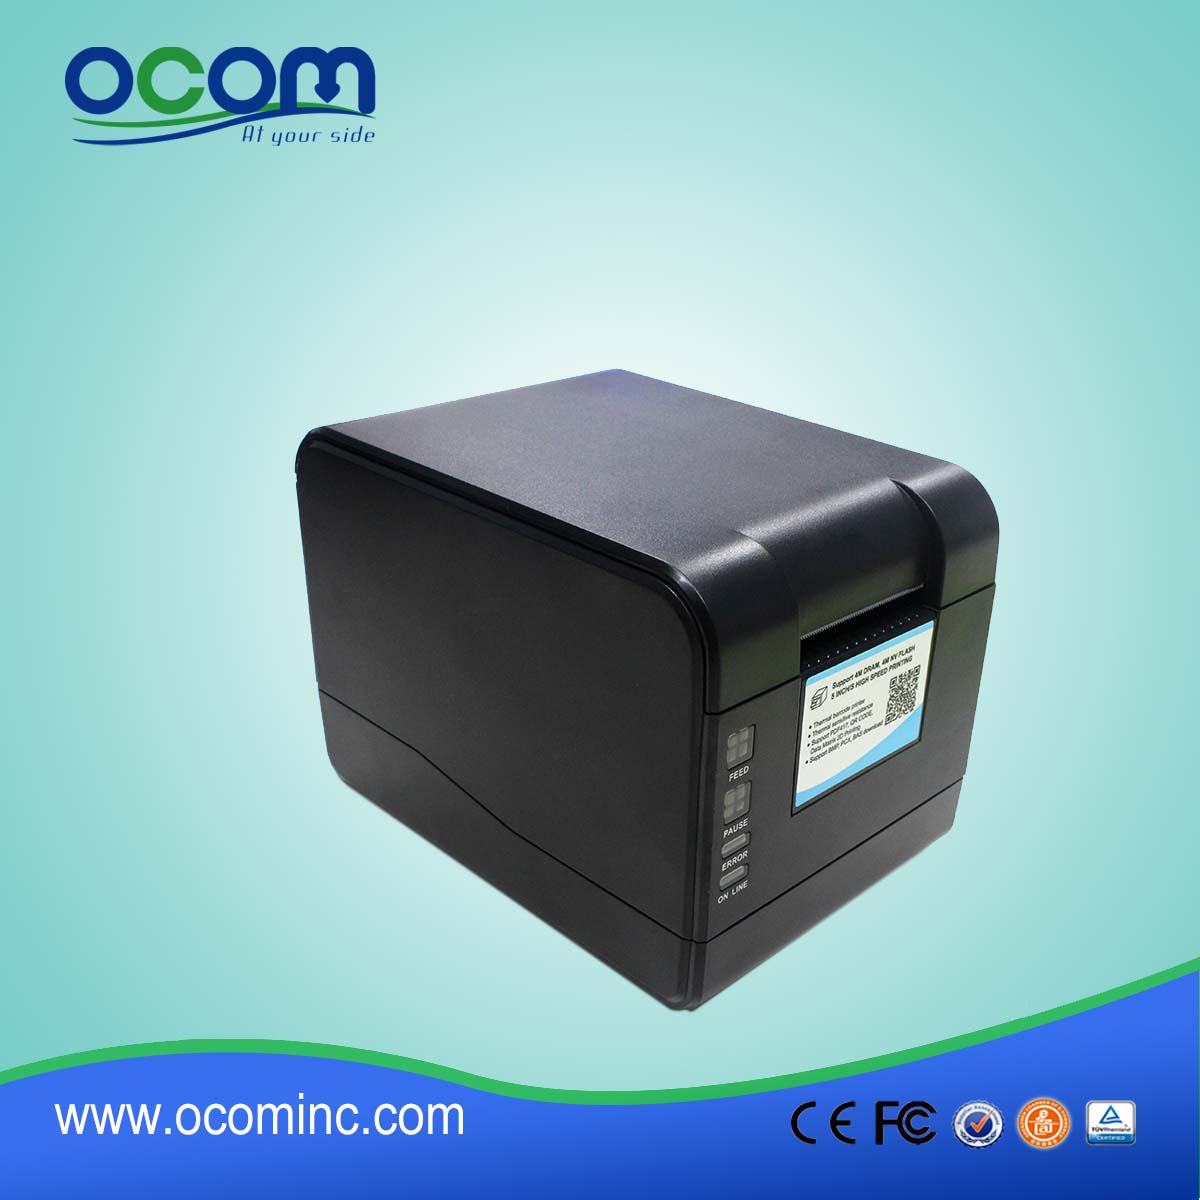 2 Inch Desktop Direct Thermal Barcode Label Printer with USB Interface